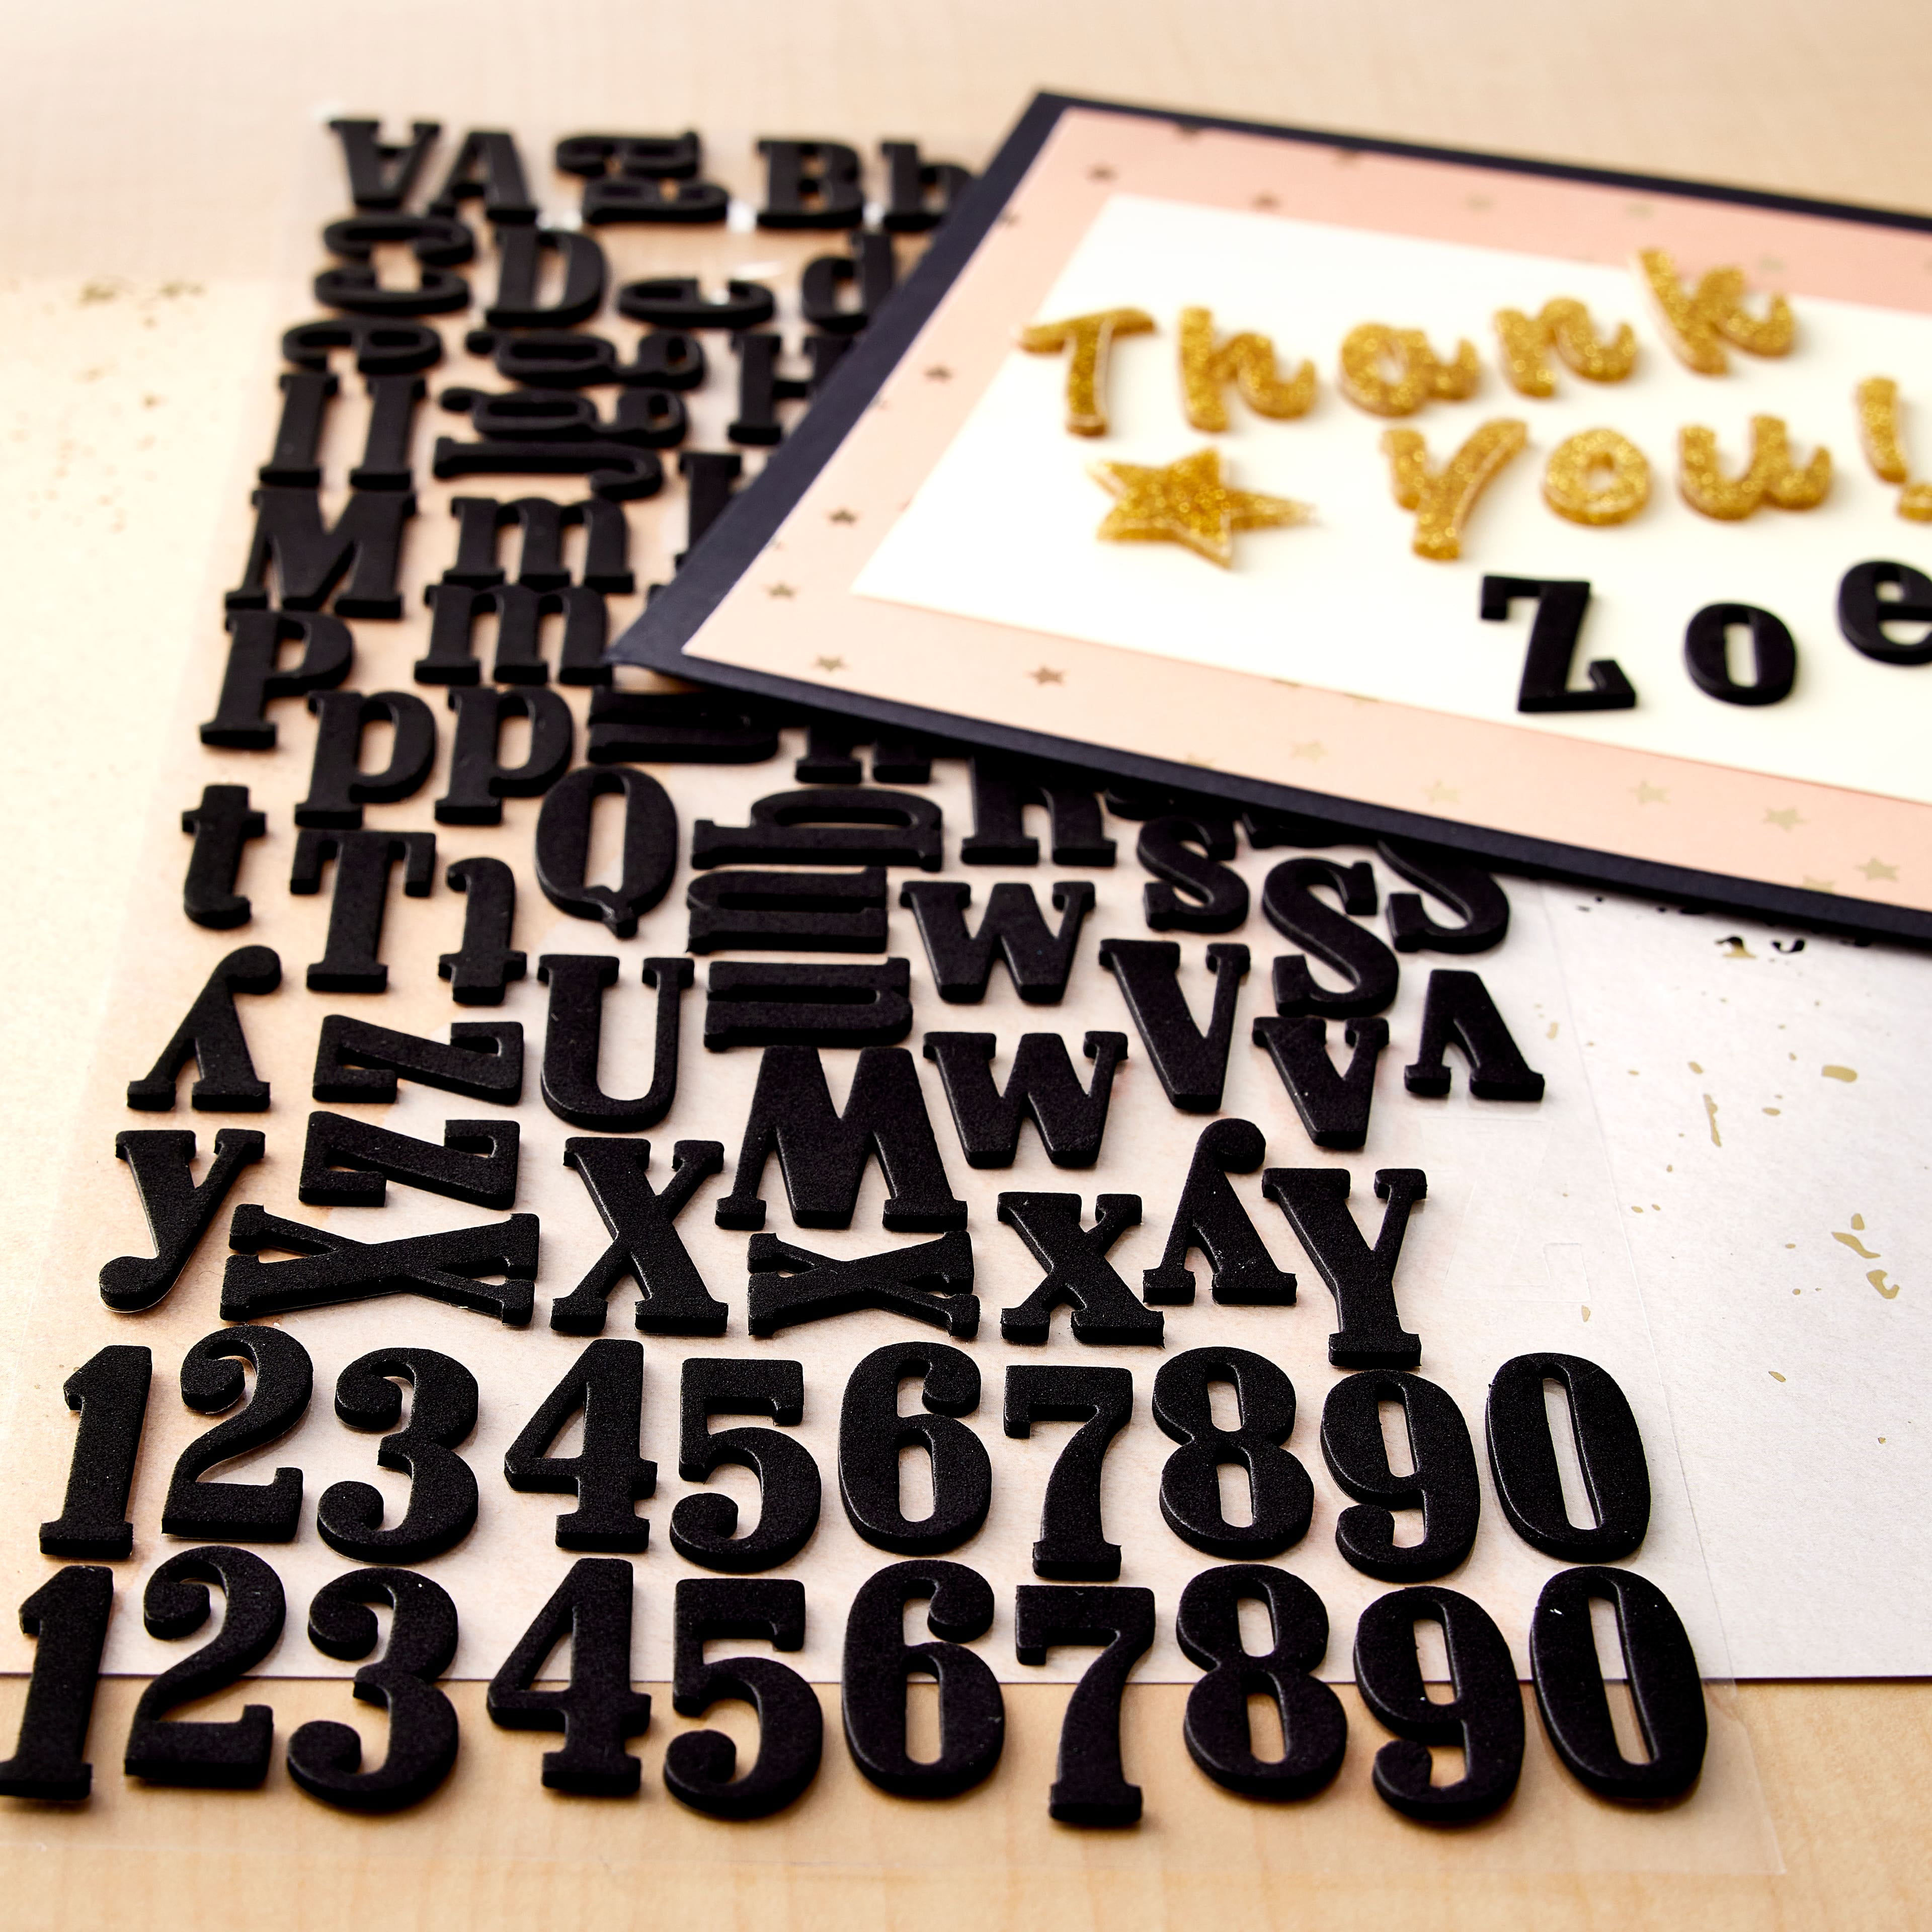 12 Packs: 2 ct. (24 total) Small Block Alphabet Stickers by Recollections™